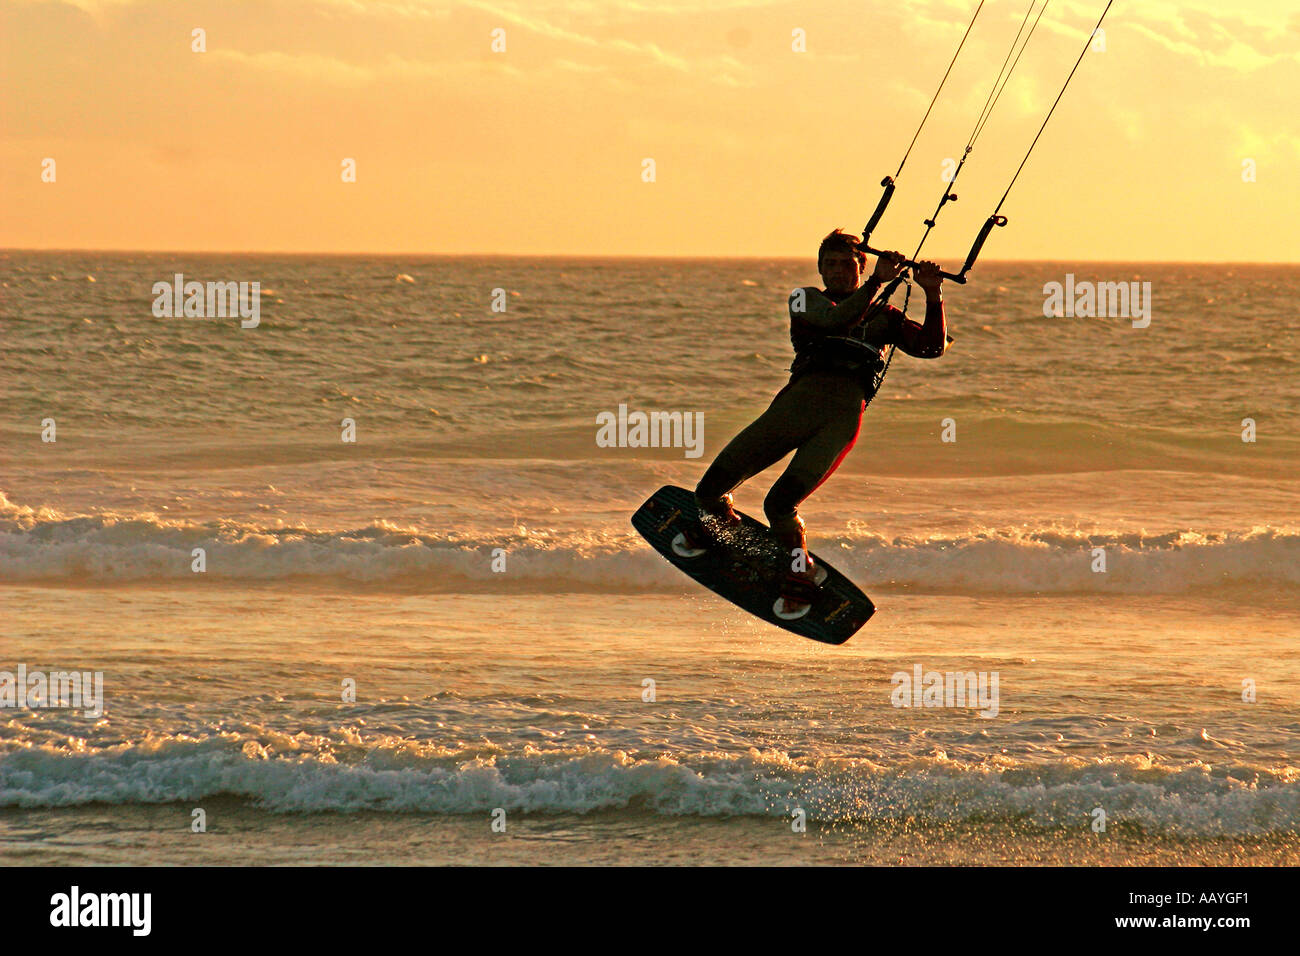 south africa cape town blouberg beach kite surfer Stock Photo